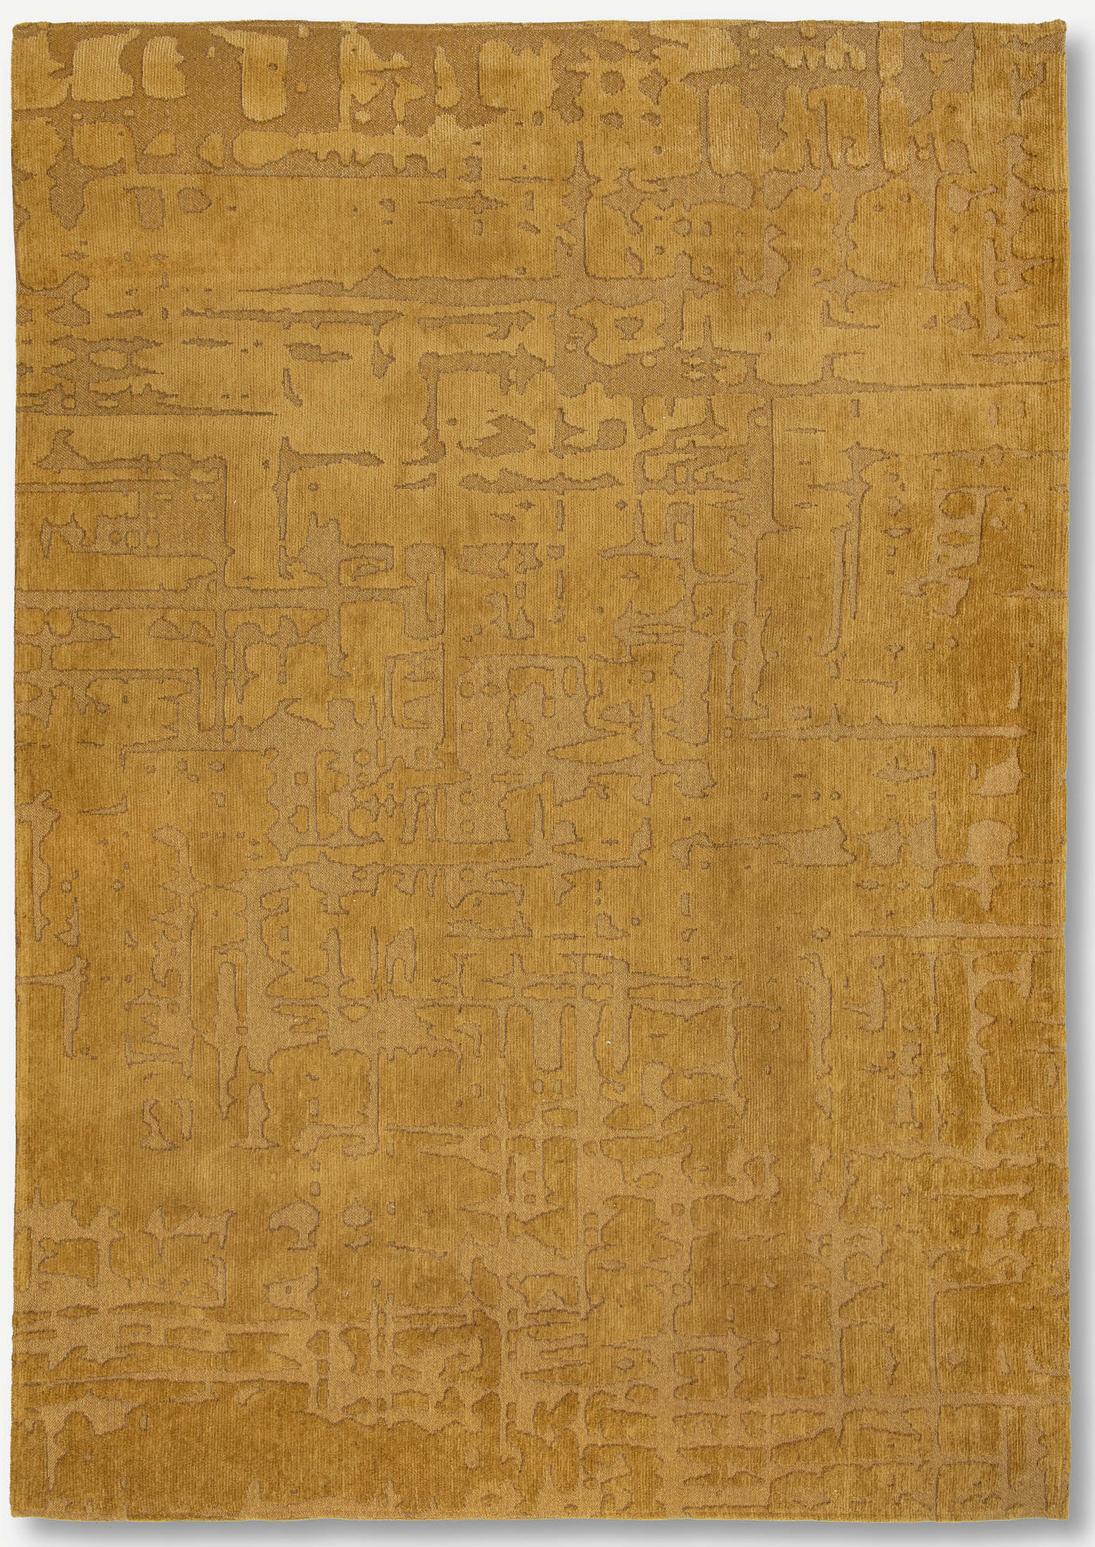 Abstract Gold Belgian Rug ☞ Size: 4' 7" x 6' 7" (140 x 200 cm)